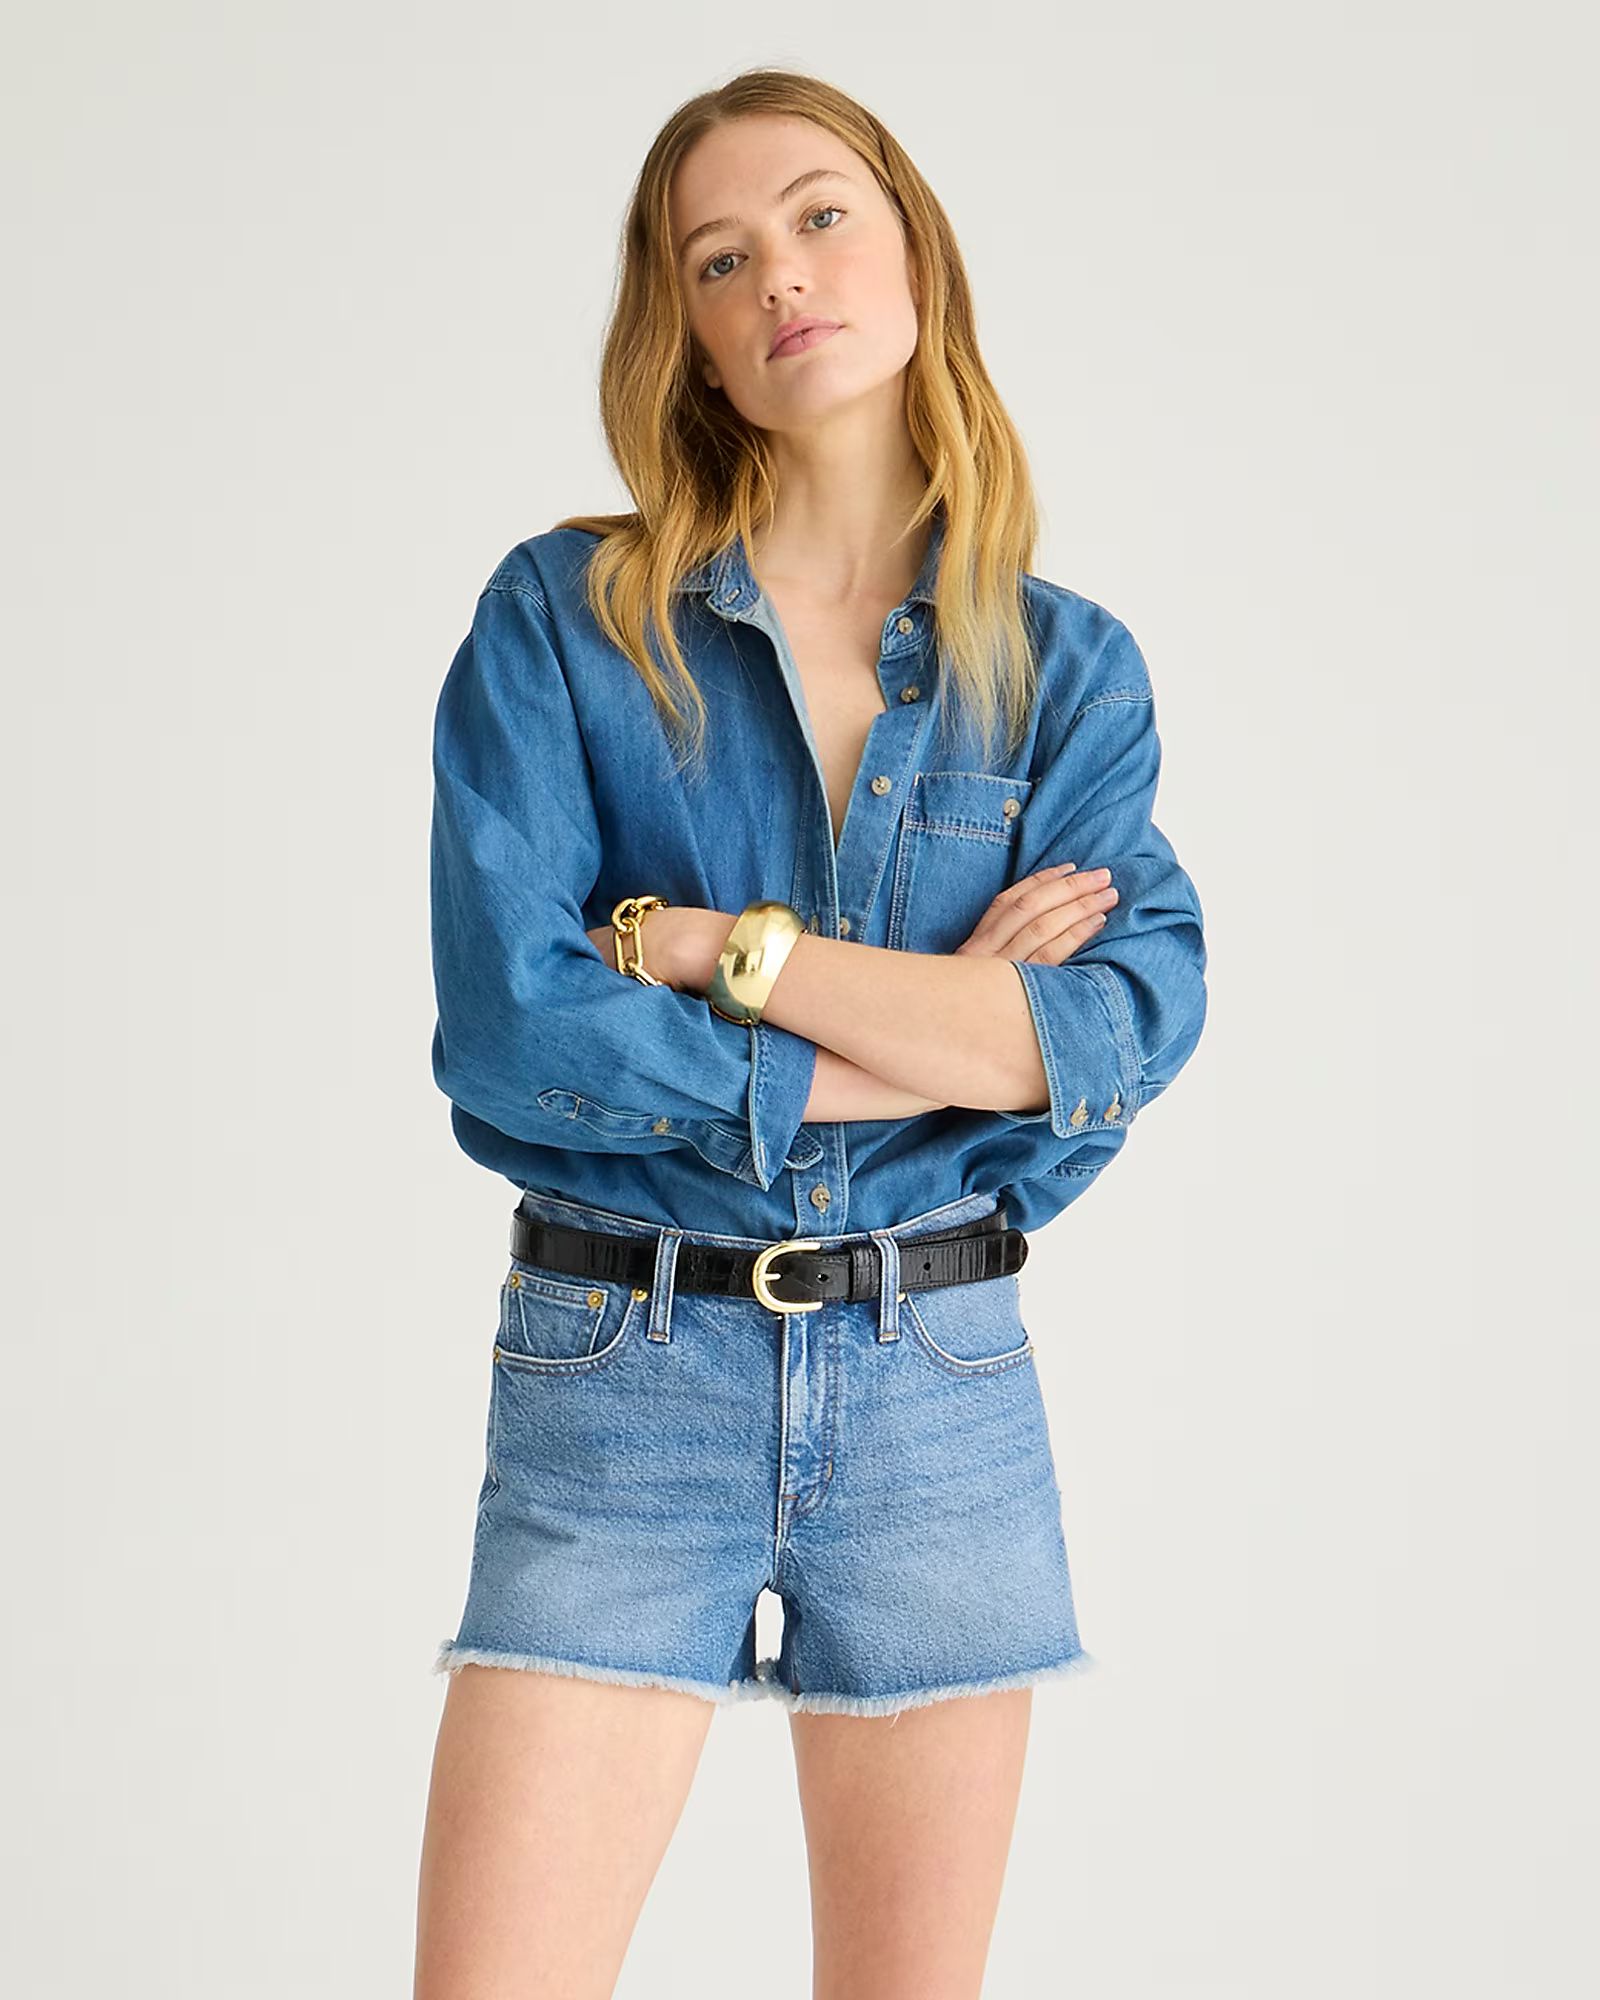 top rated4.6(5 REVIEWS)Mid-rise denim short in Lakeshore wash$72.50$89.50 (19% Off)Limited time. ... | J.Crew US